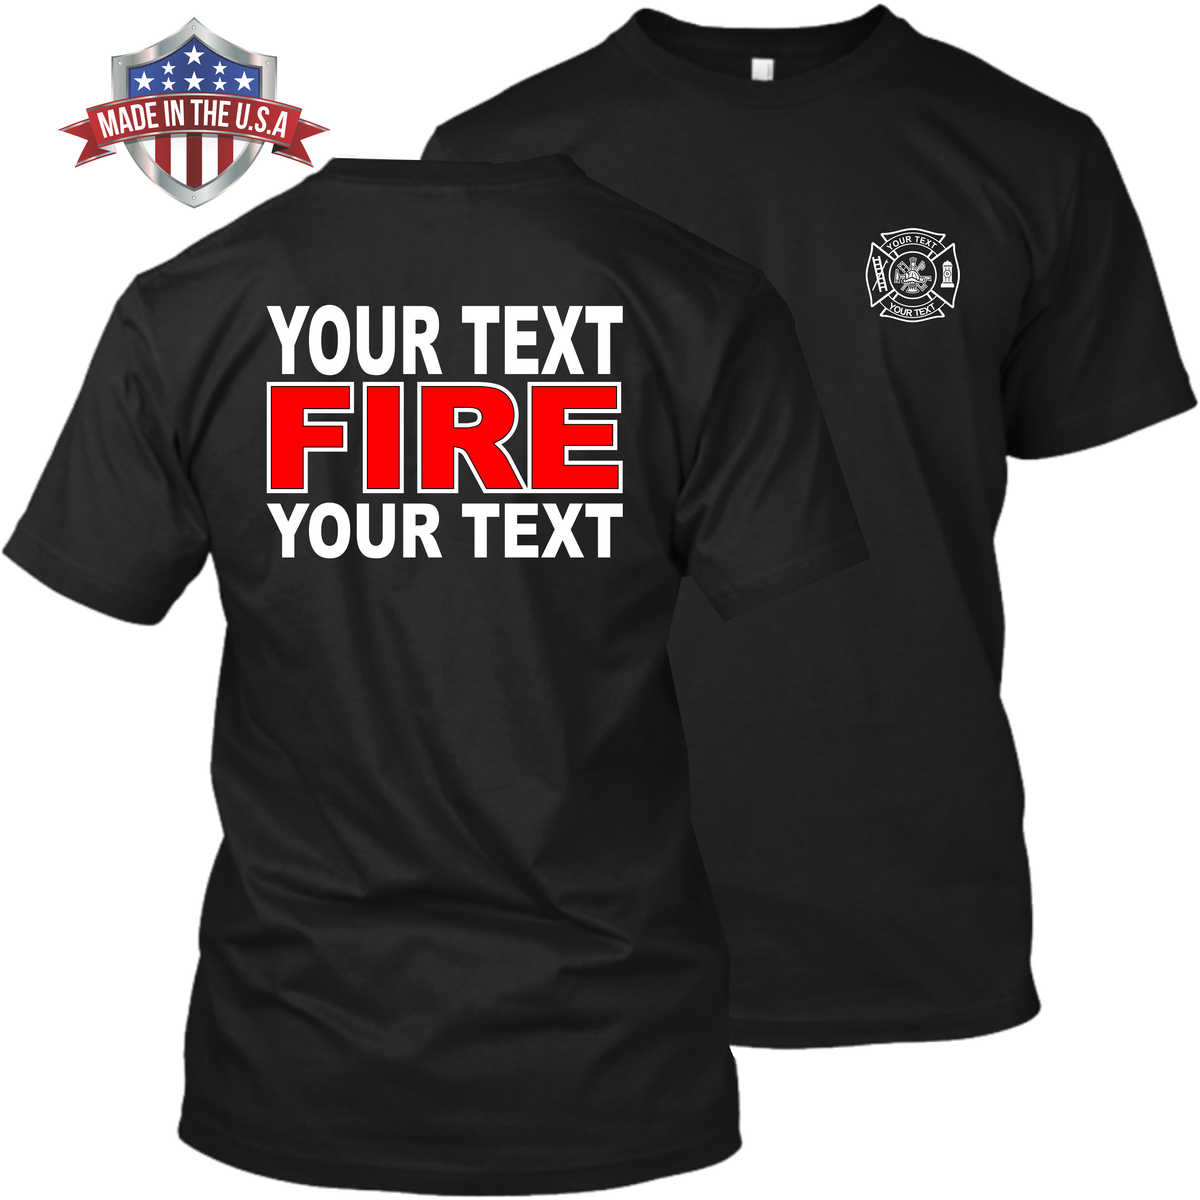 Fire Department - Your Text Here - Apparel - 2 Pack - Read the Description